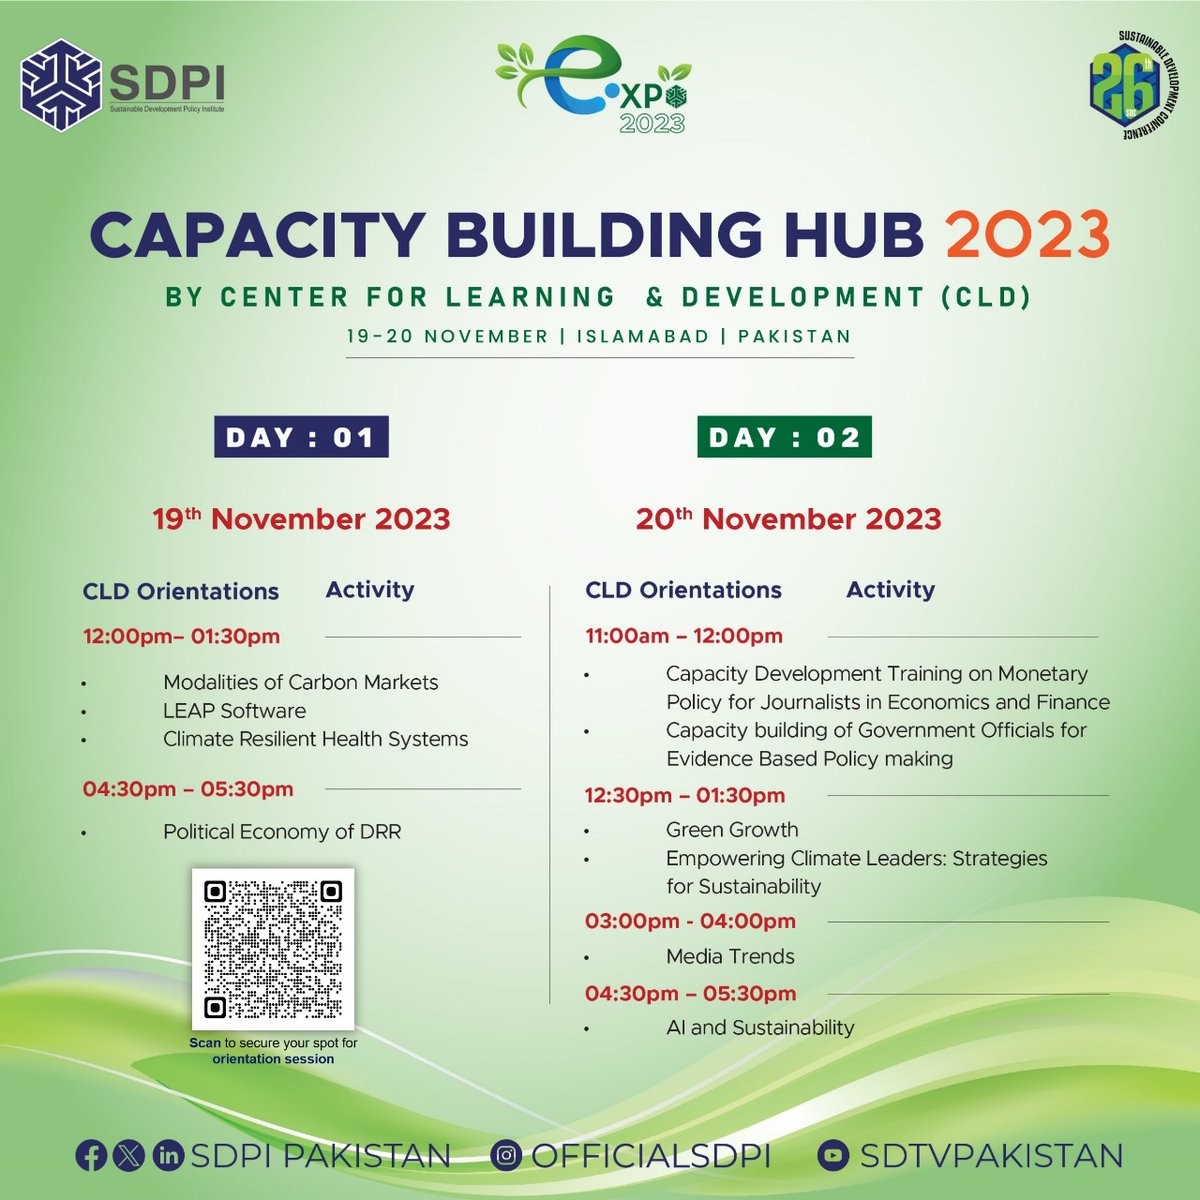 @Abidsuleri @vaqarahmed @Sajidaminjaved @KhalidWaleed_ @SattiSadia CLD's initiative 'Capacity Building Hub' during Sustainable Investment EXPO #SIE2023 is offering multidimensional training sessions ranging from: 🏭Carbon Markets 📊Emission modelling ⚕Health systems 🗒Political Economy of DRR 📒Economic reporting 📈Green Growth 🤝Governance